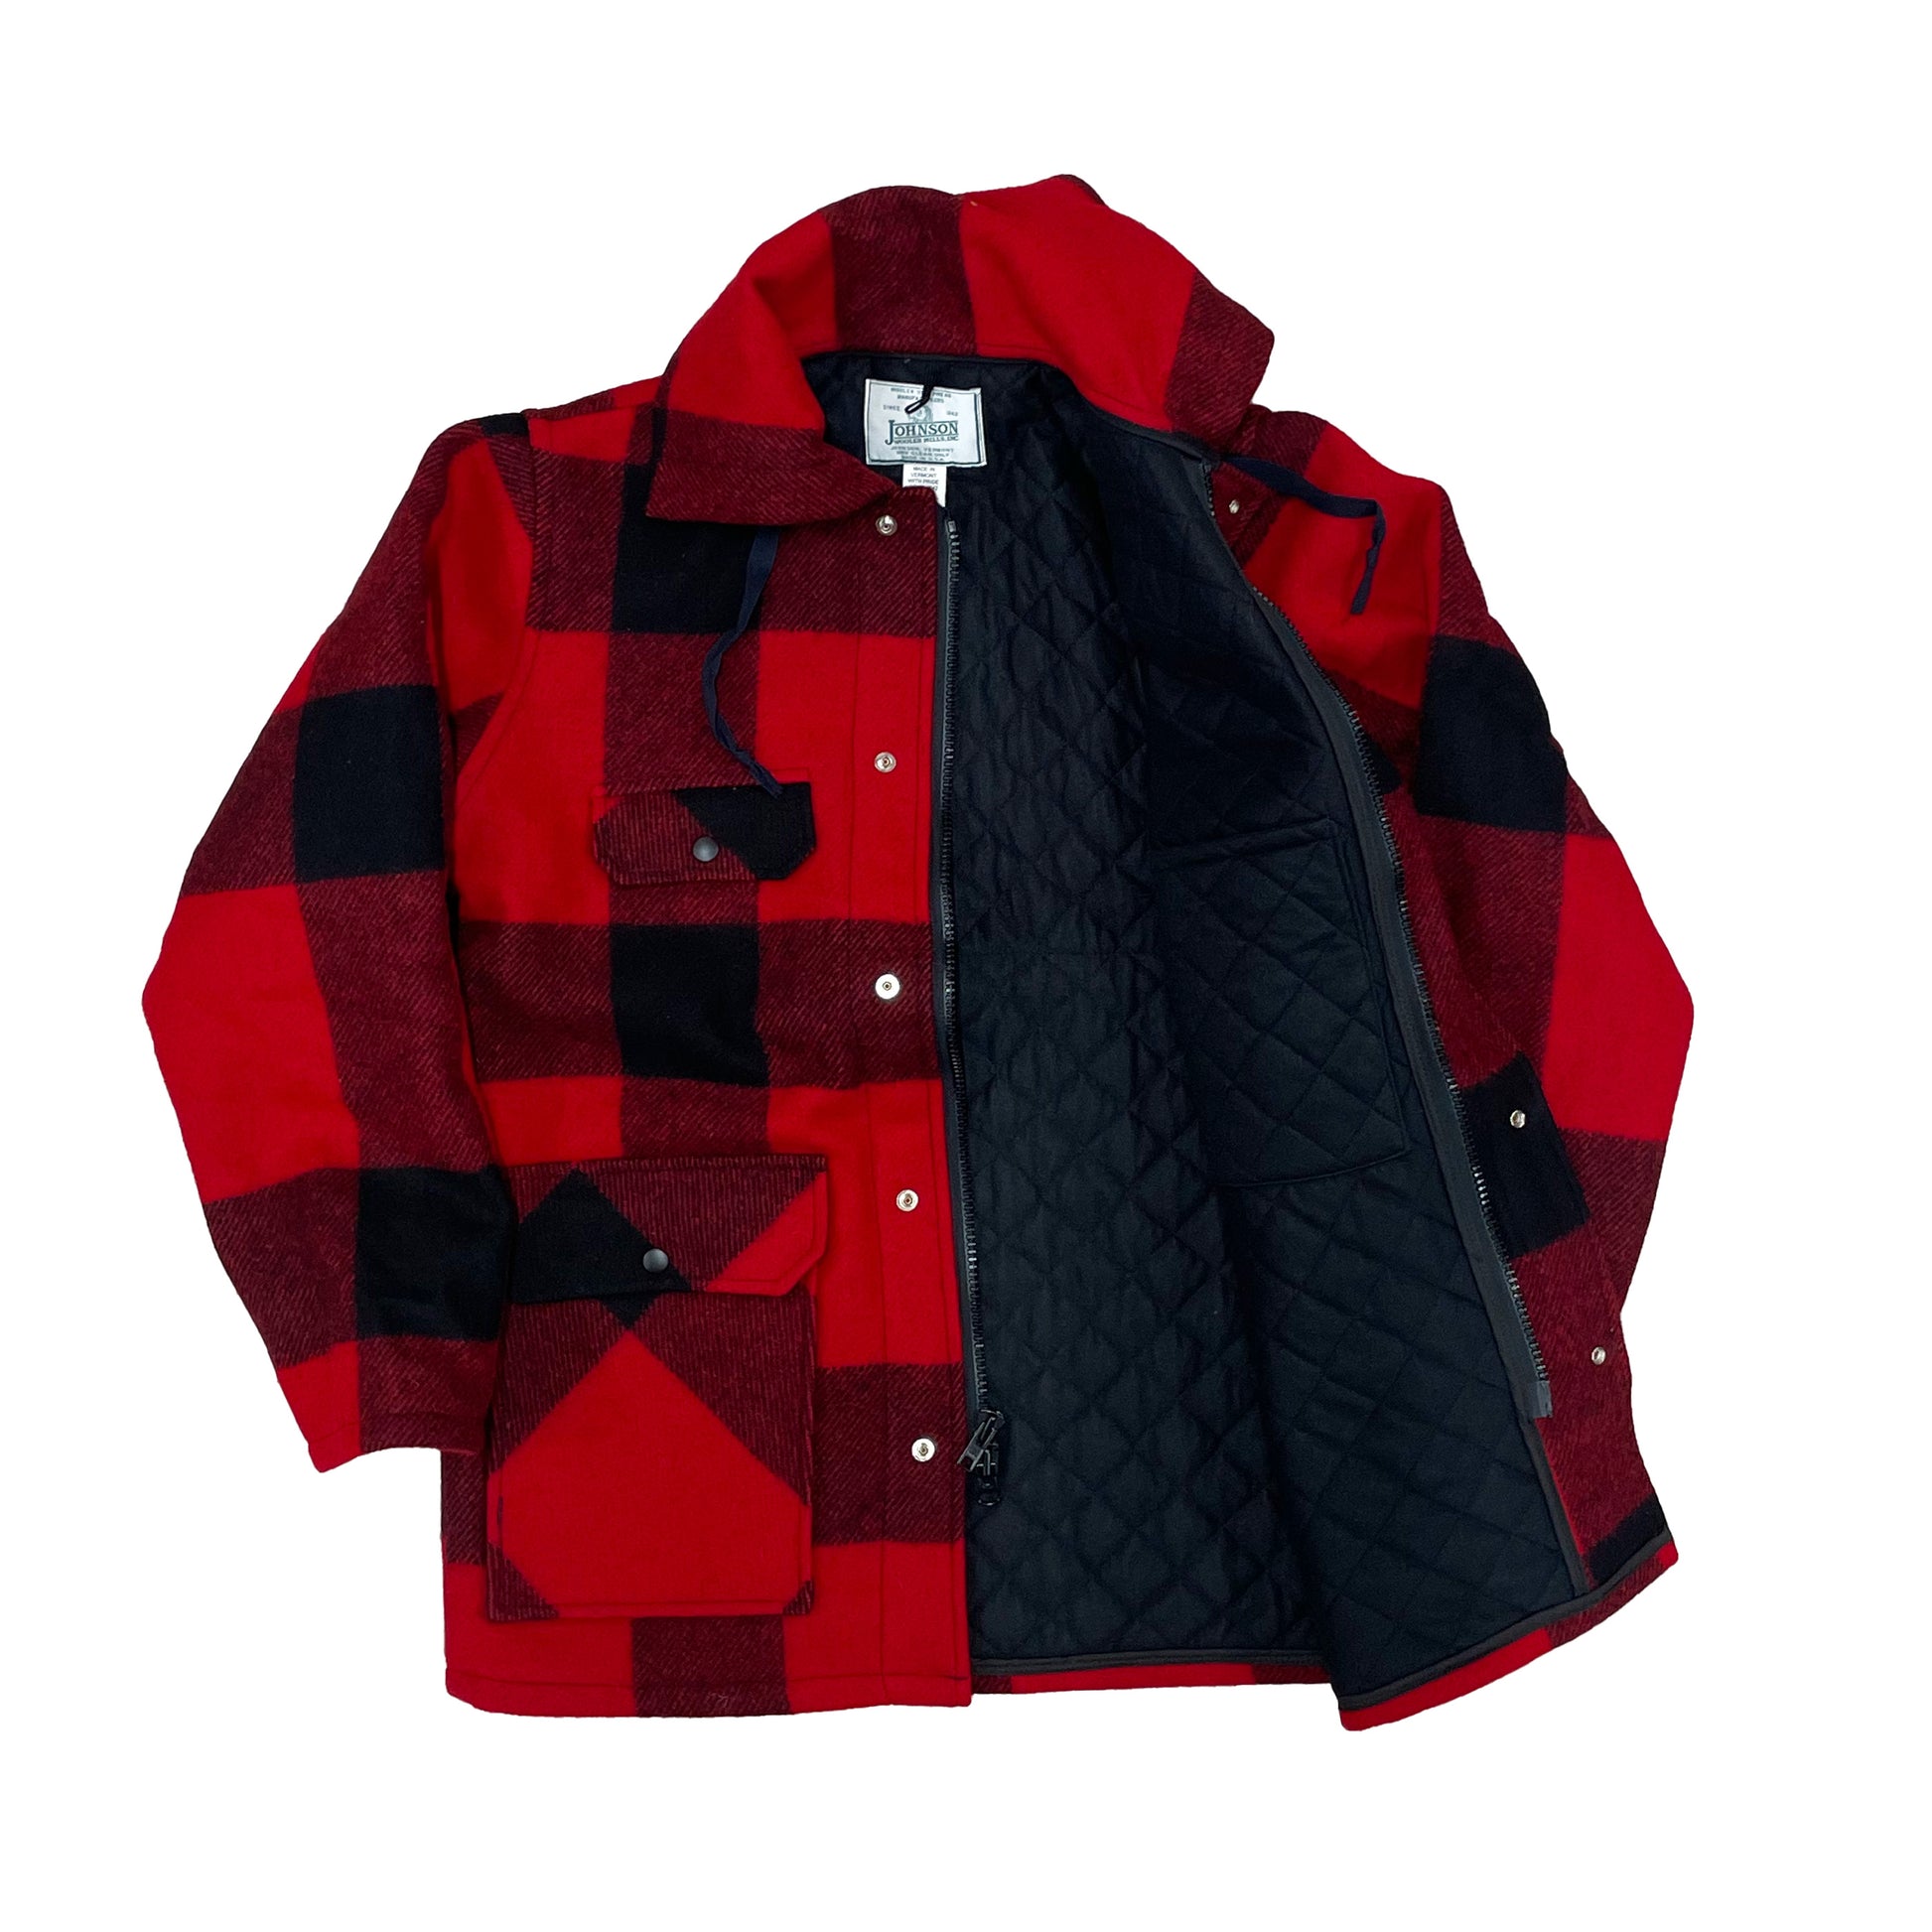 Johnson Woolen Mills Red and black buffalo check outdoor wool coat inside view with tricot lining